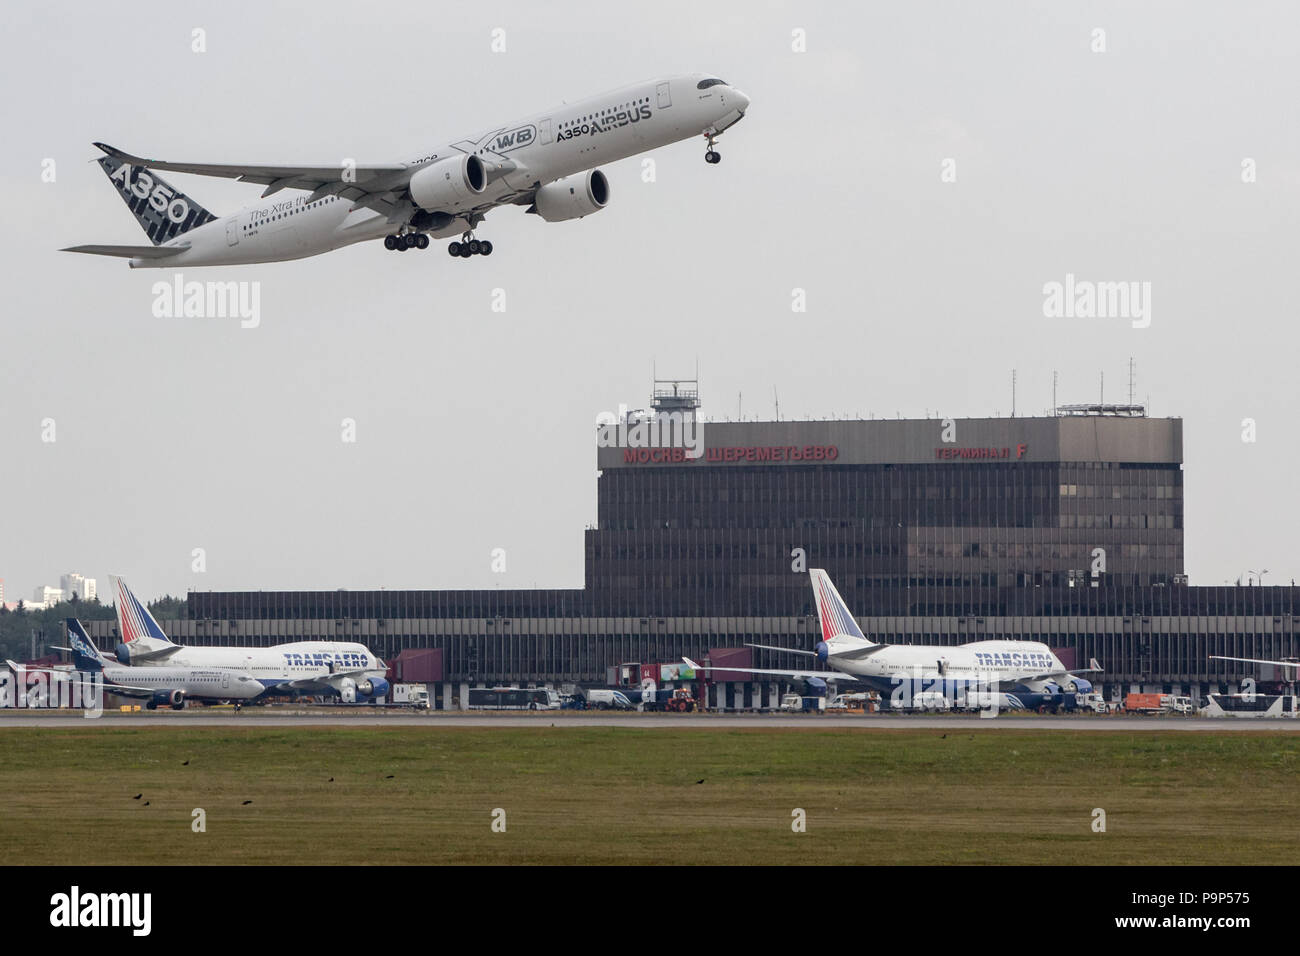 The Airbus A350 XWB civil jet airplane takes off from Moscow-Sheremetyevo airport during its worldwide tour. Stock Photo